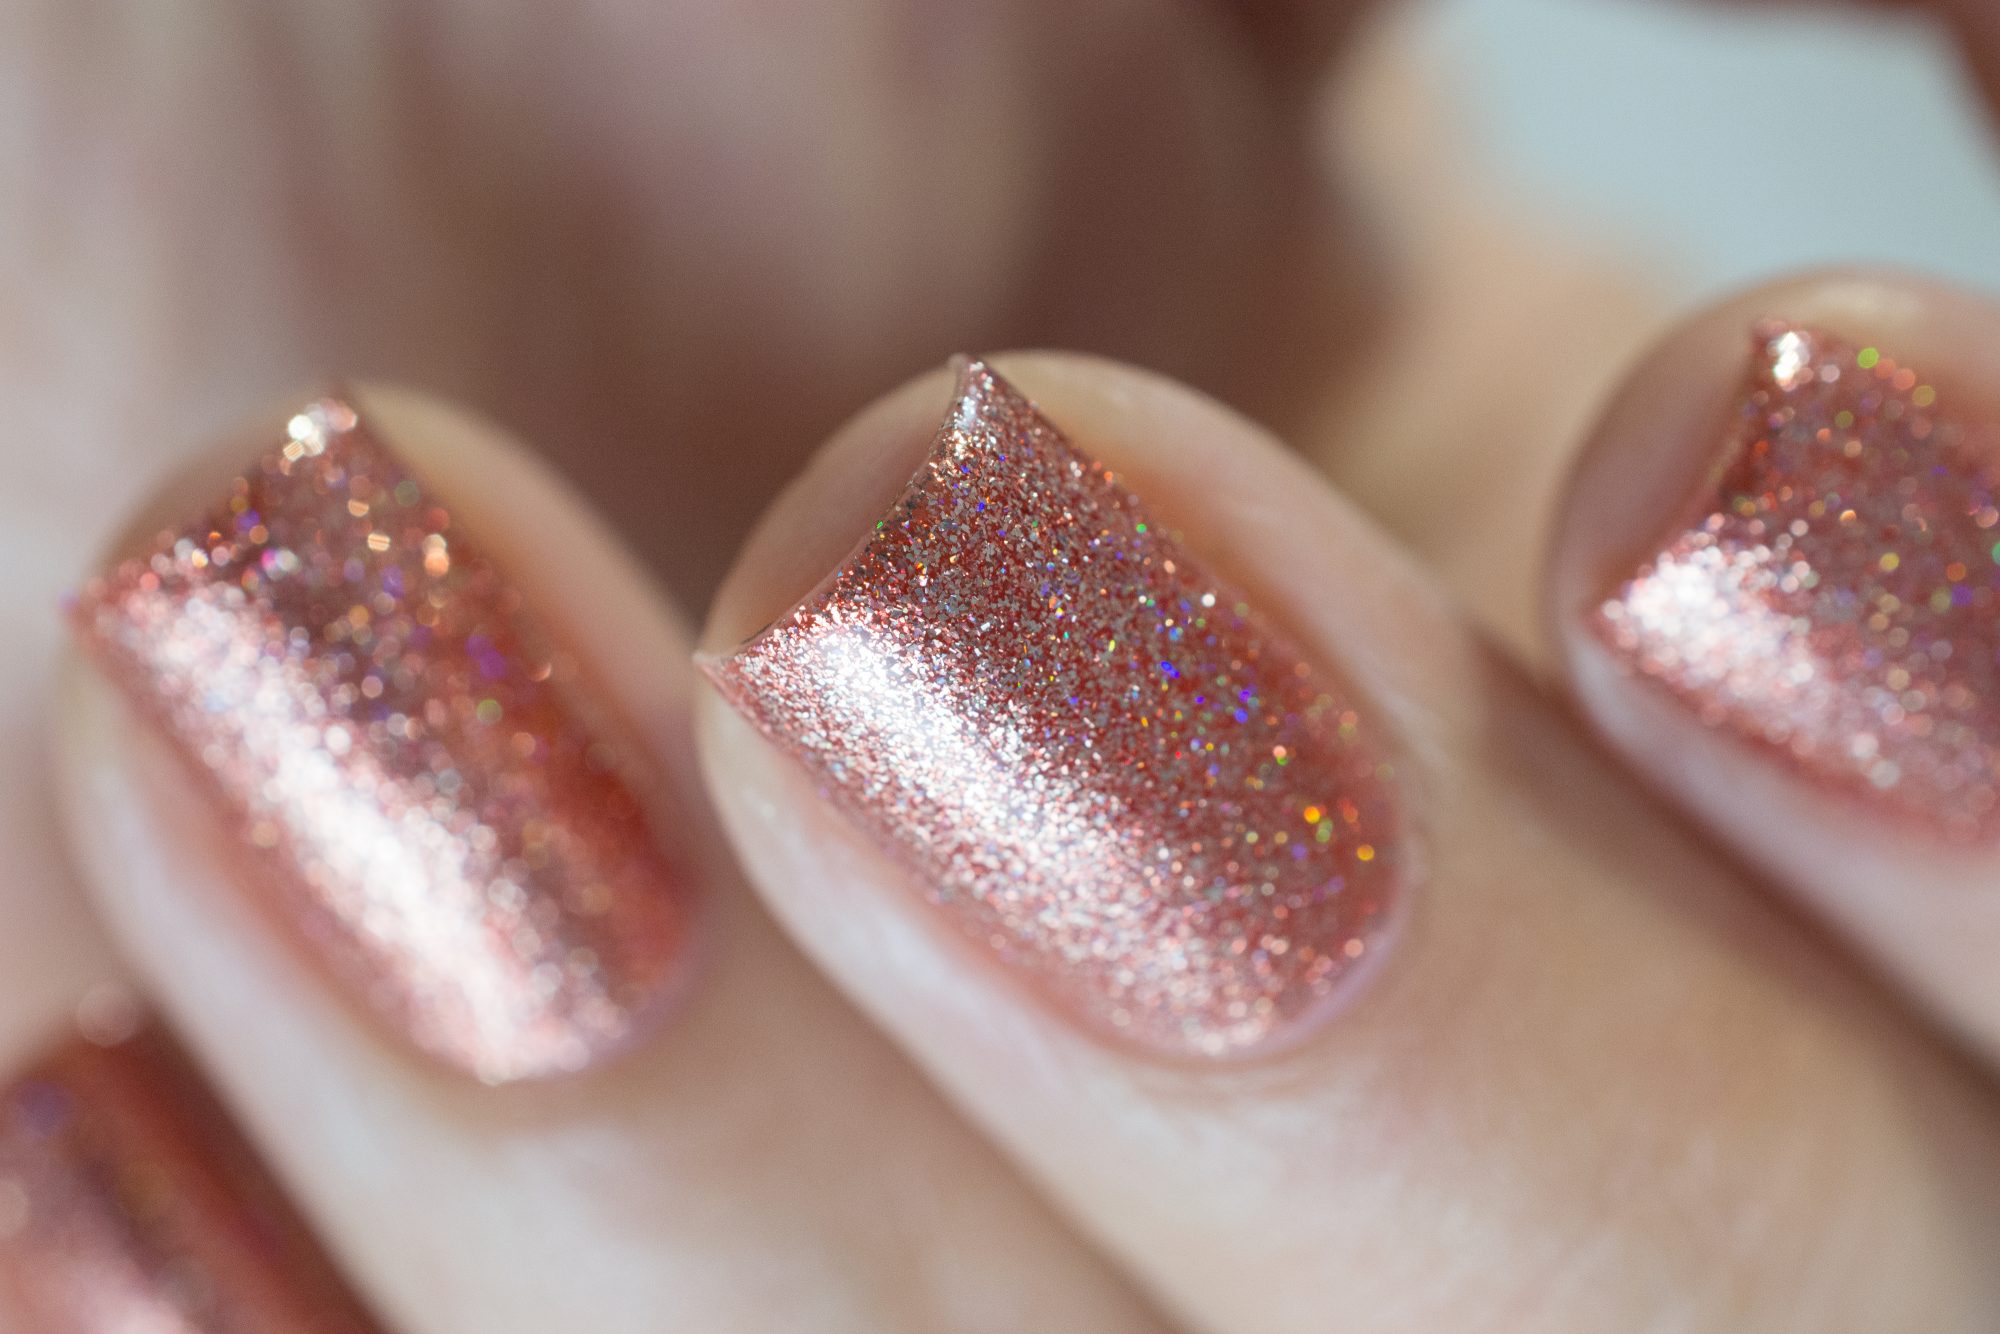 10. CND Vinylux Weekly Polish - Copper Mine - wide 3